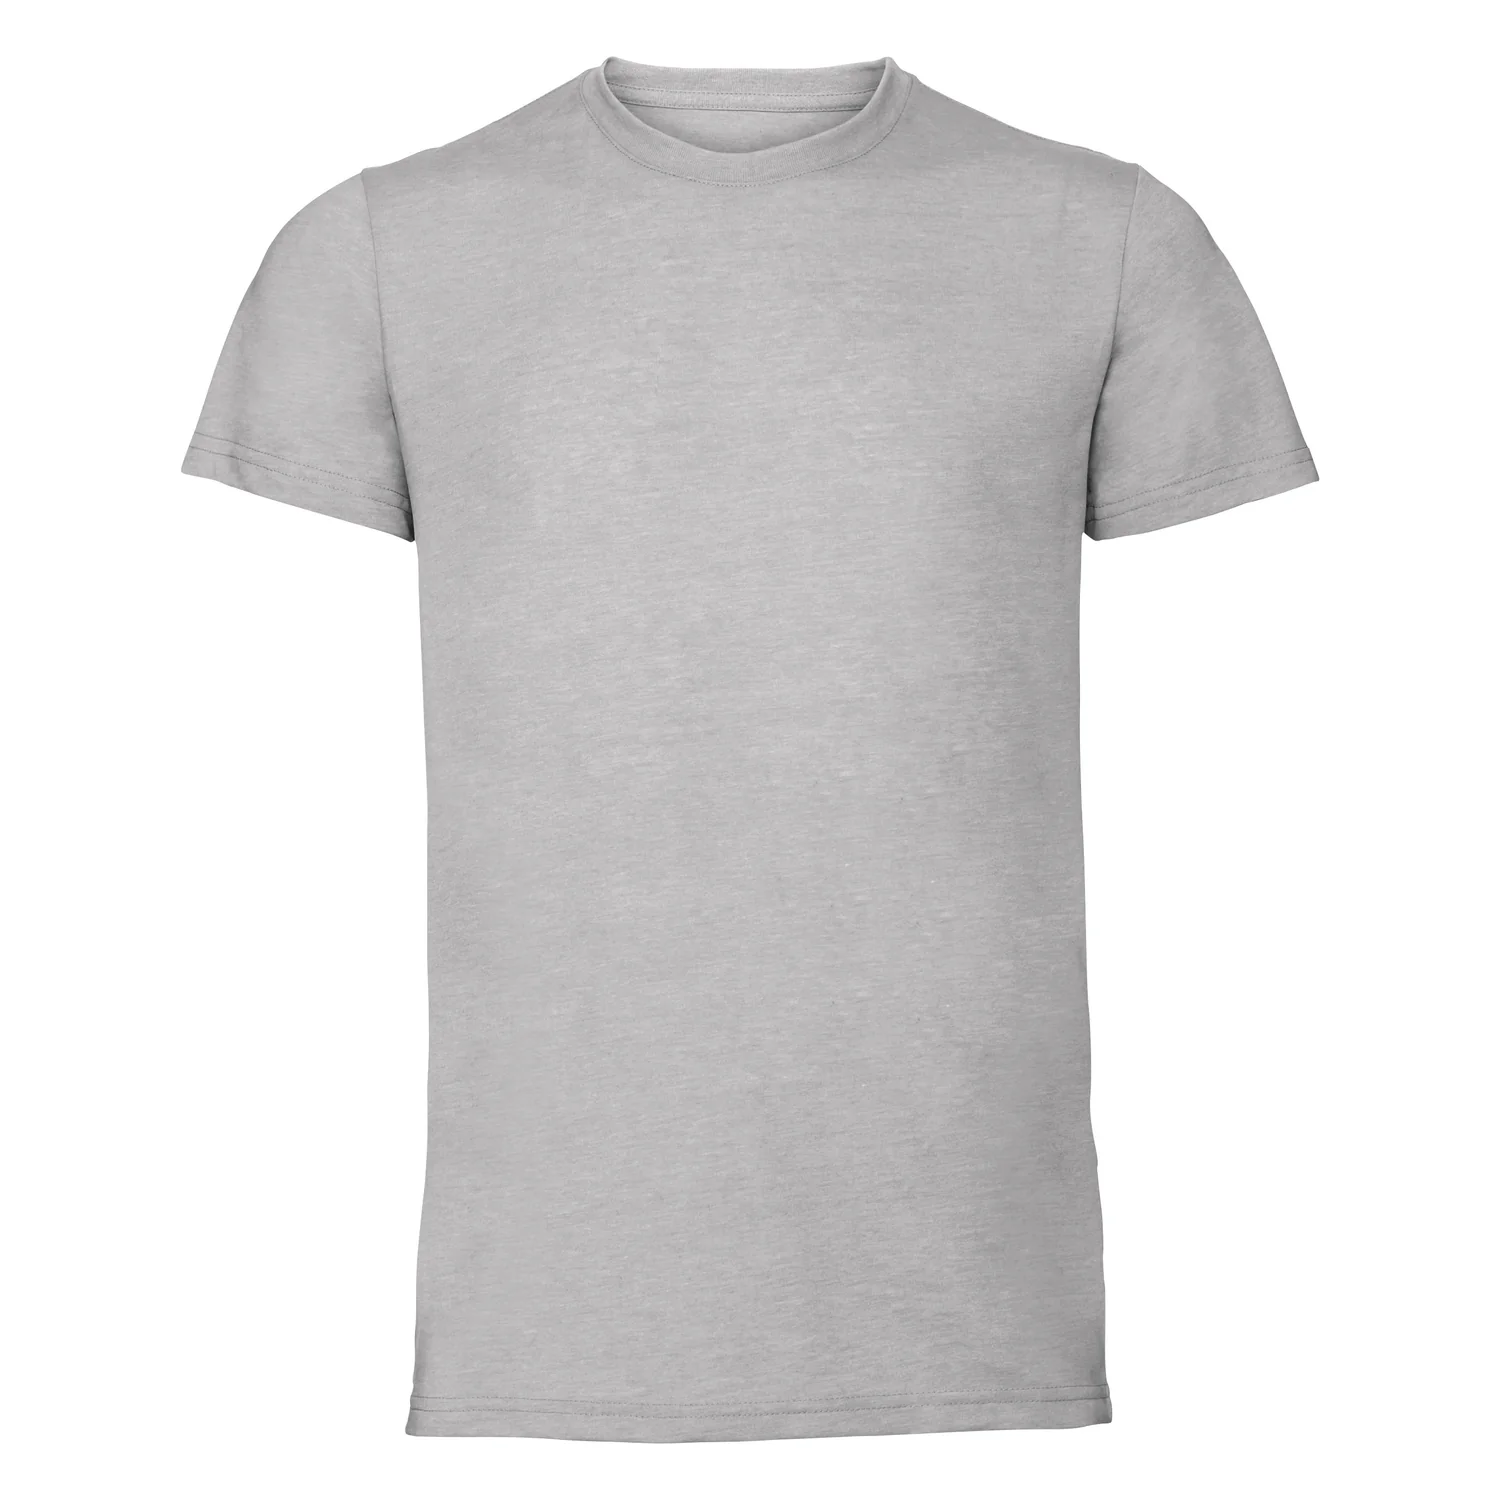 Men's HD T is perfect yacht crew uniform for summer